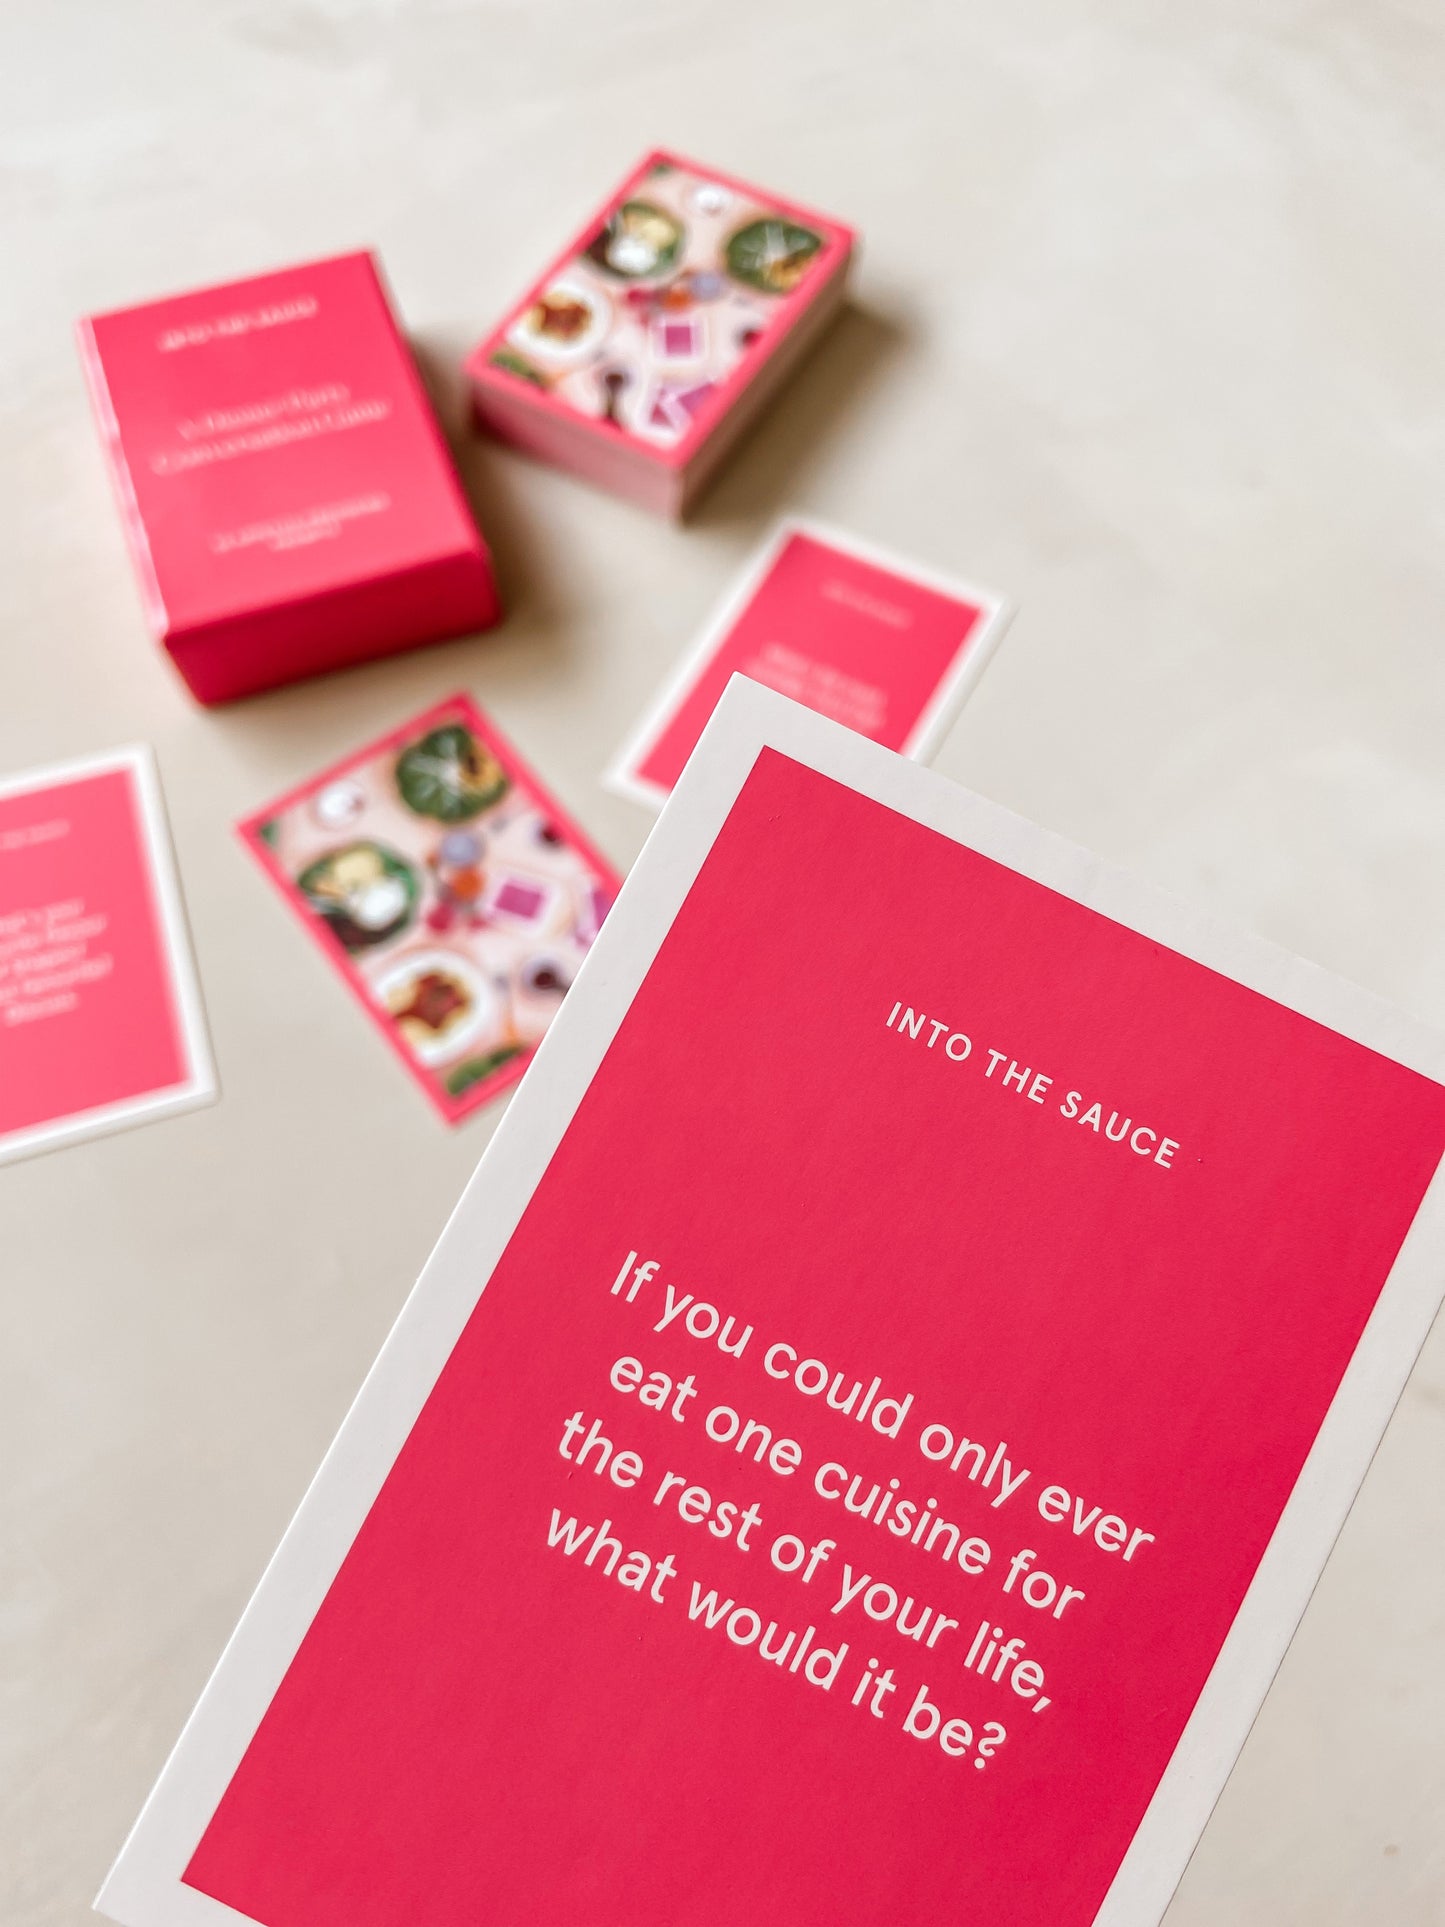 Into The Sauce: A Dinner Party Conversation Game